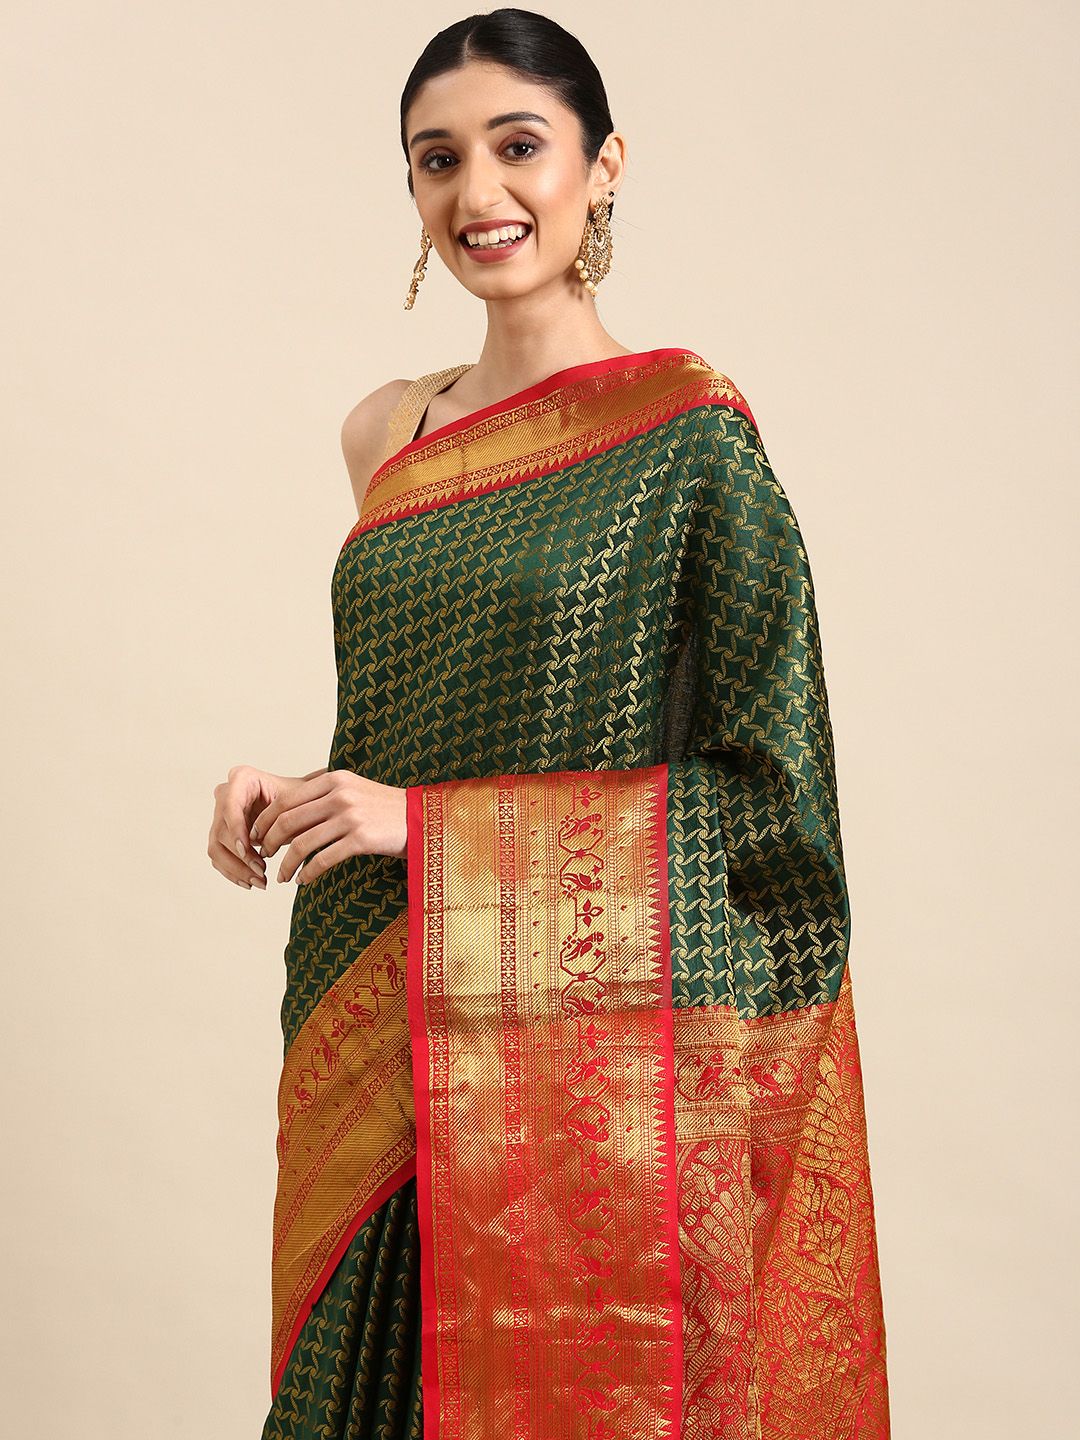 Green Color South Pattu Silk Saree-Special South Festivel Collection